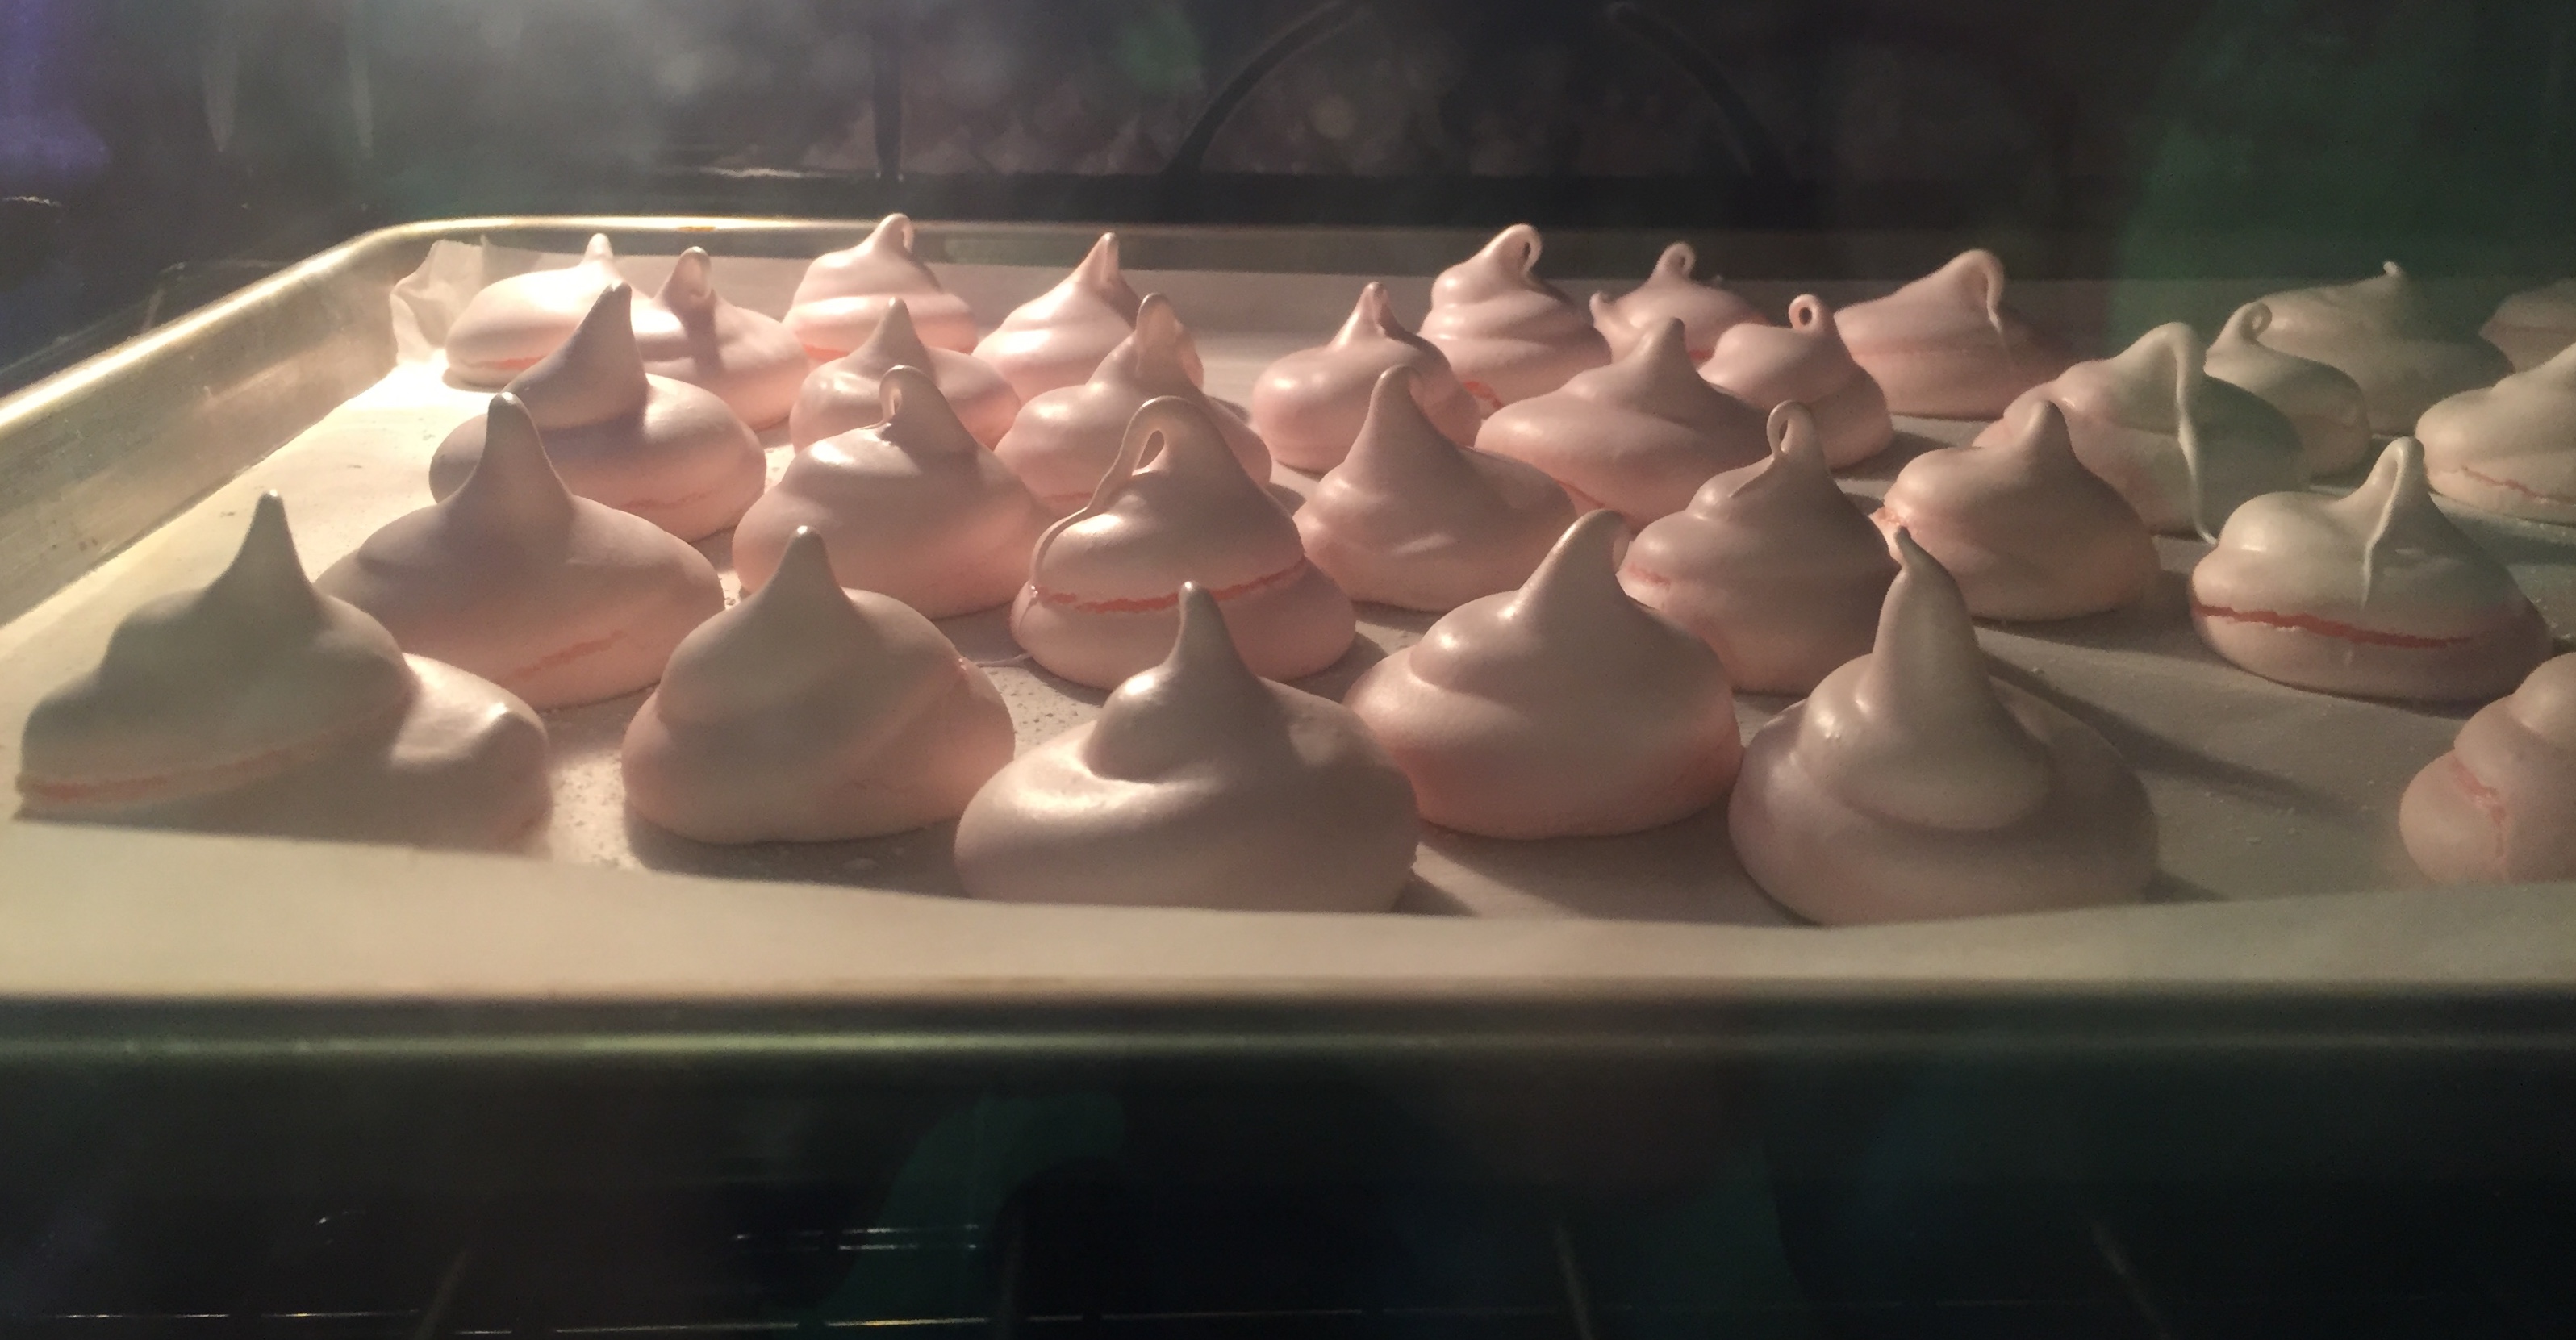 Authentic French Meringues 